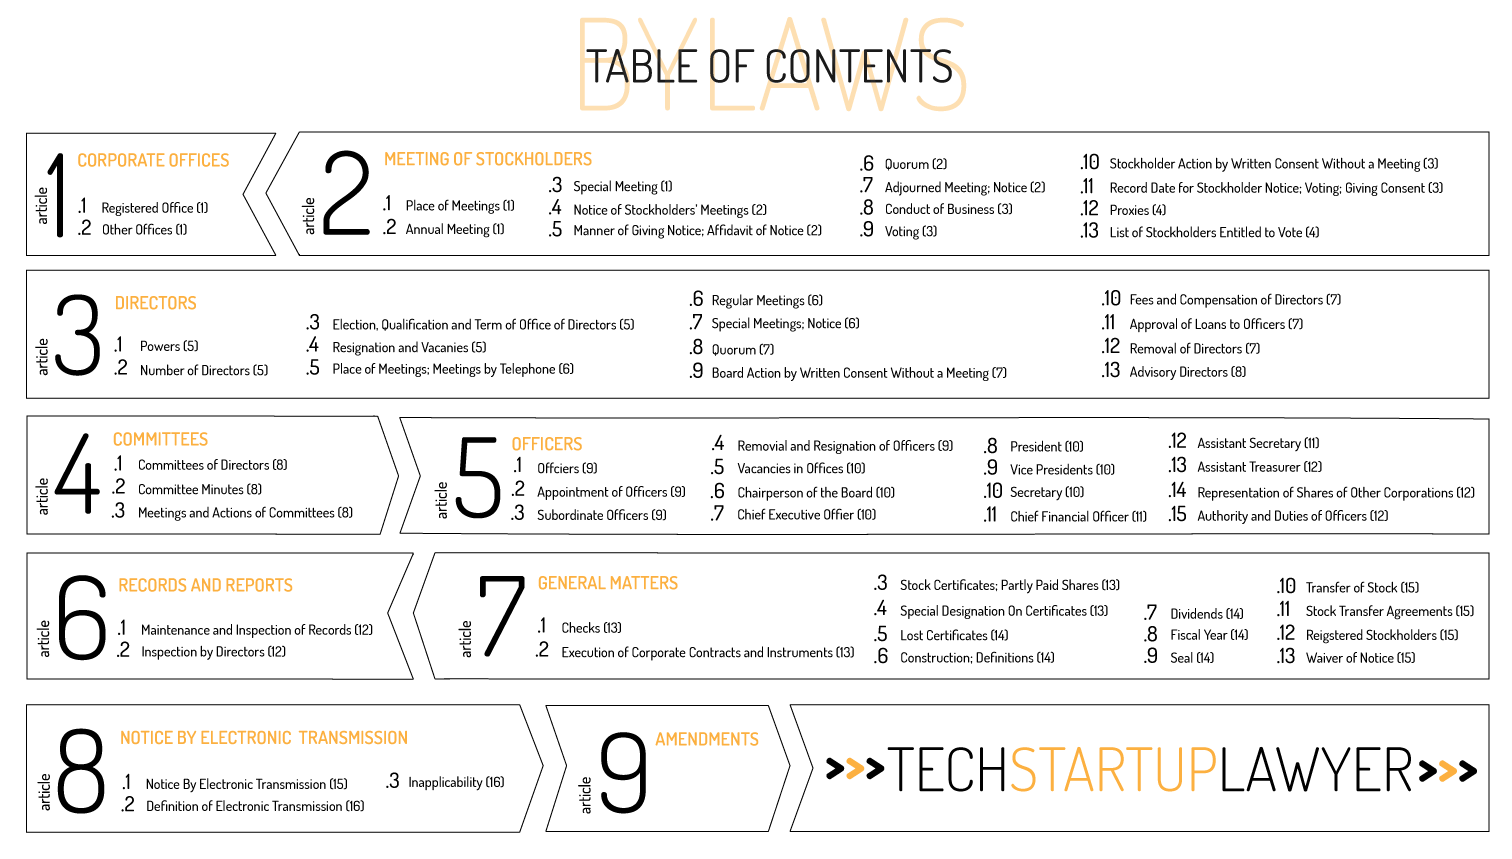 Incorporating a Technology Startup- Bylaws